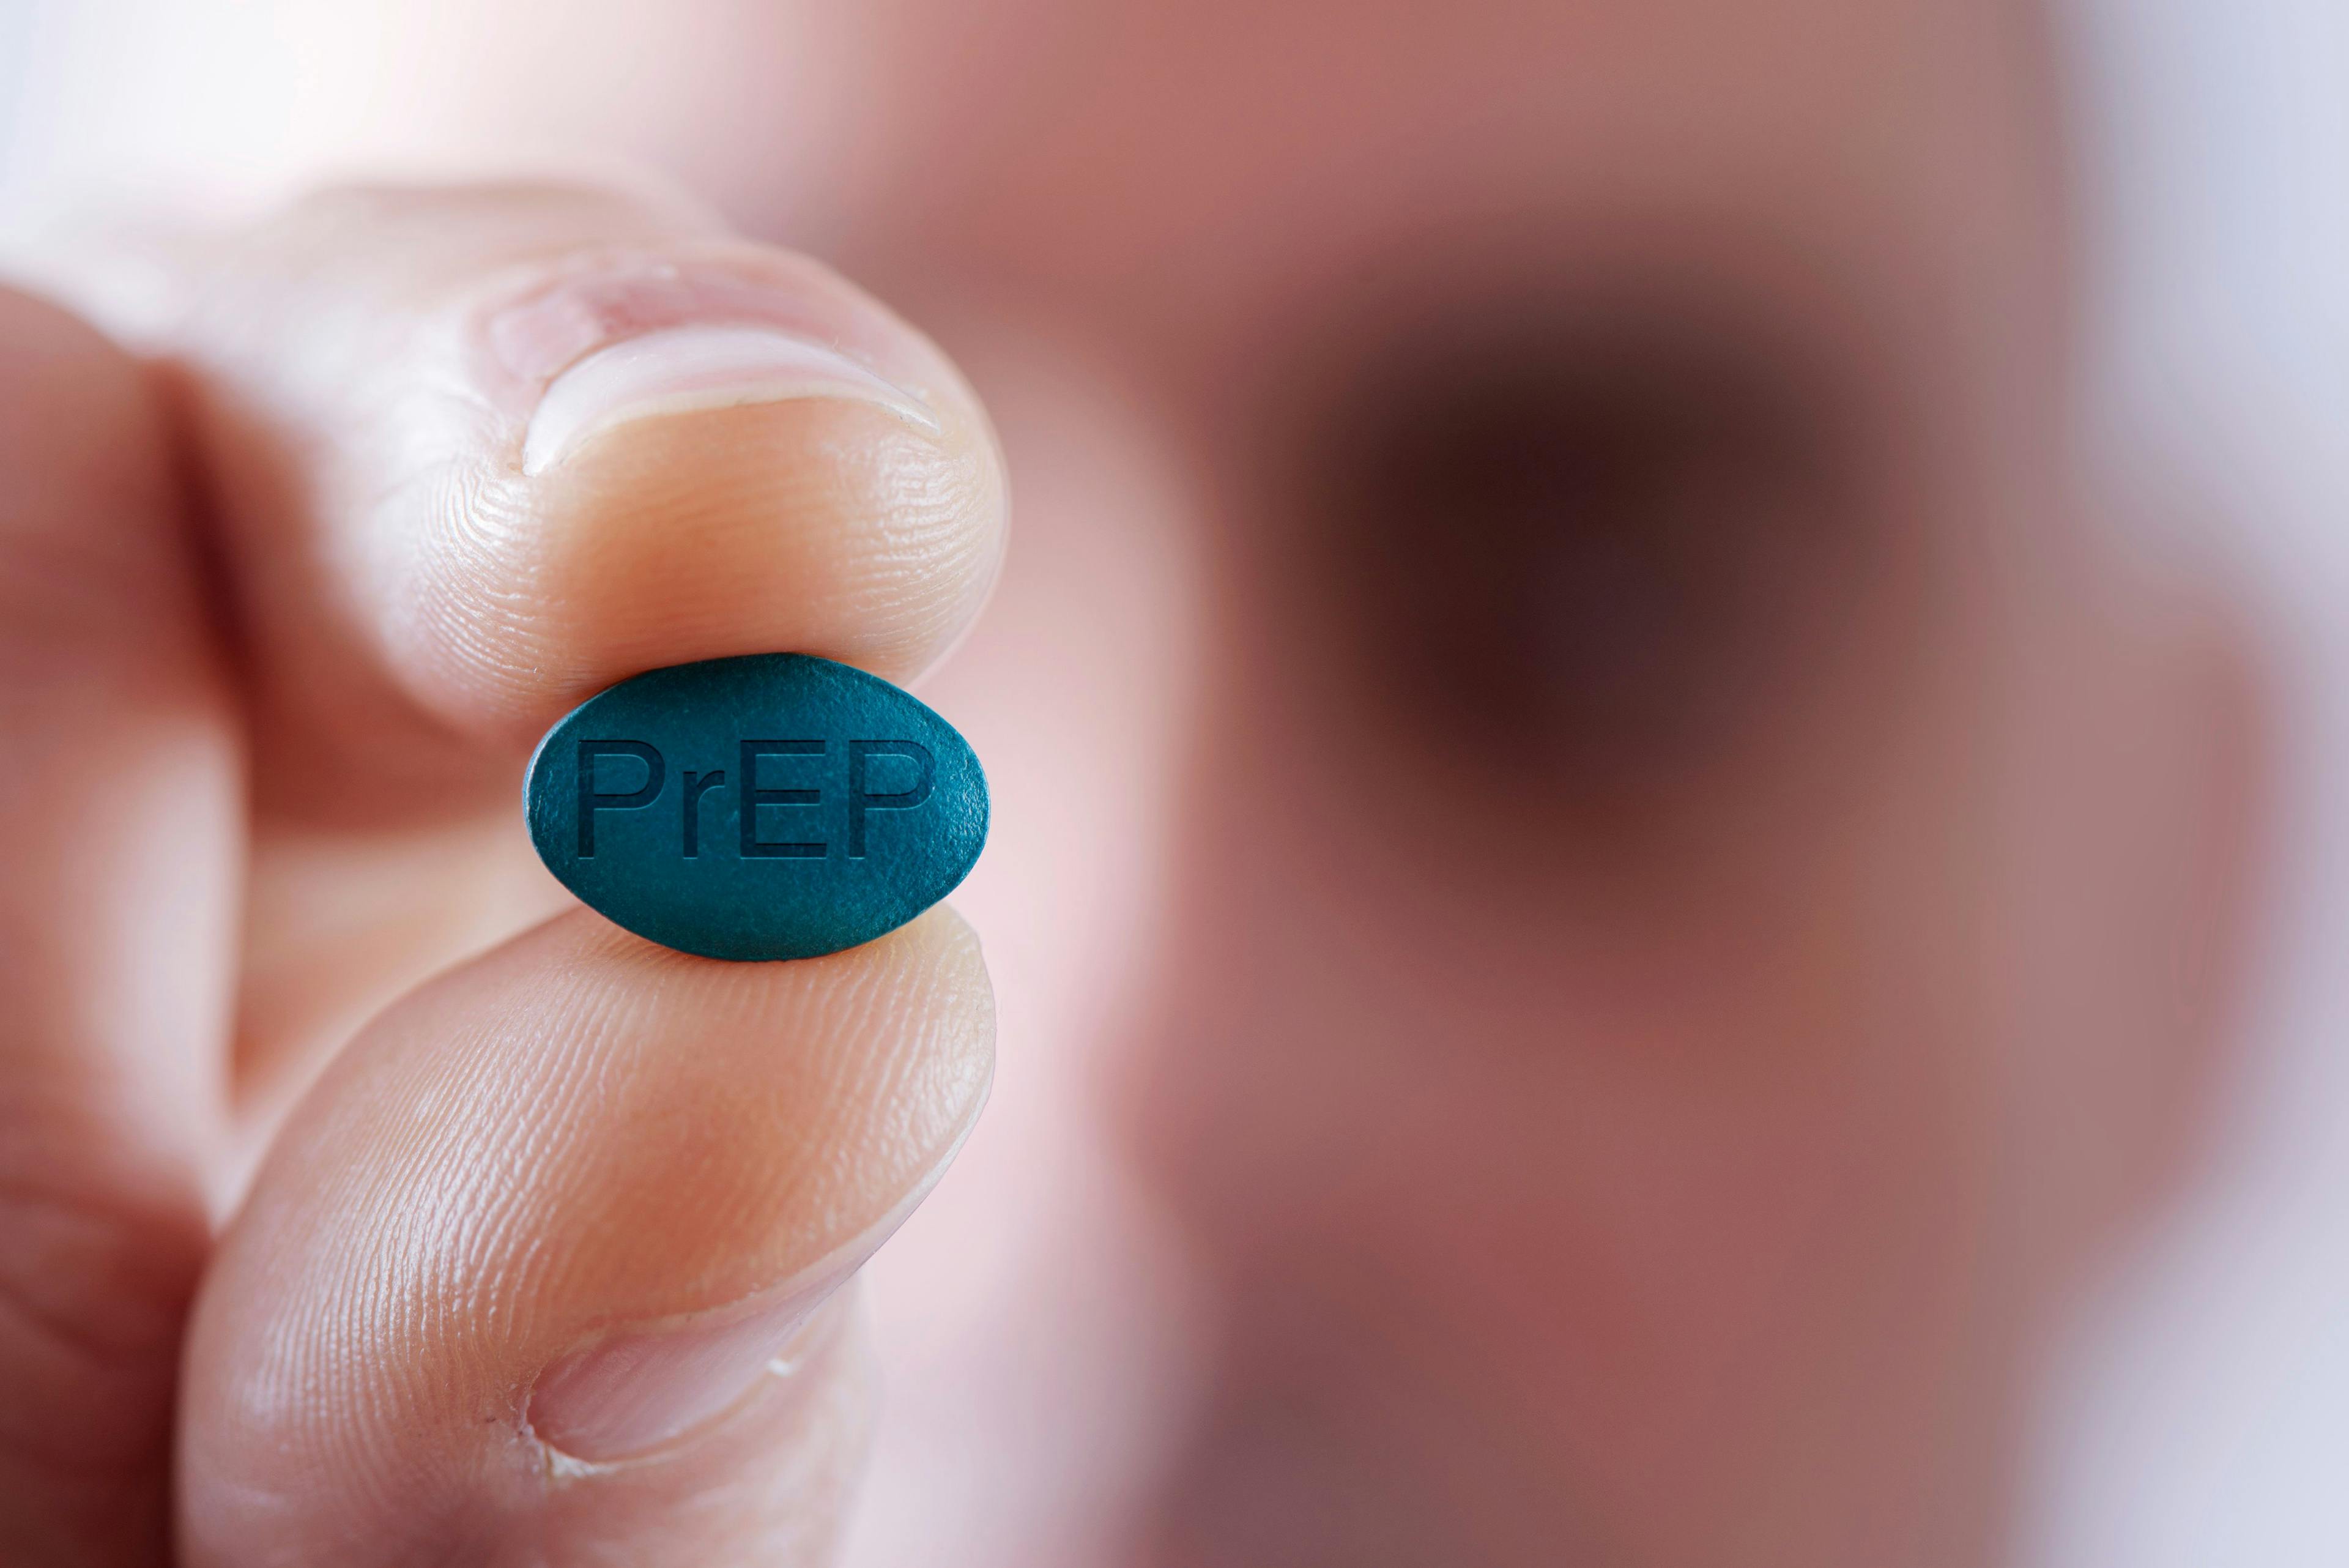 PrEP Services in Pharmacies Across Southeastern US Would Increase Treatment Capacity for HIV